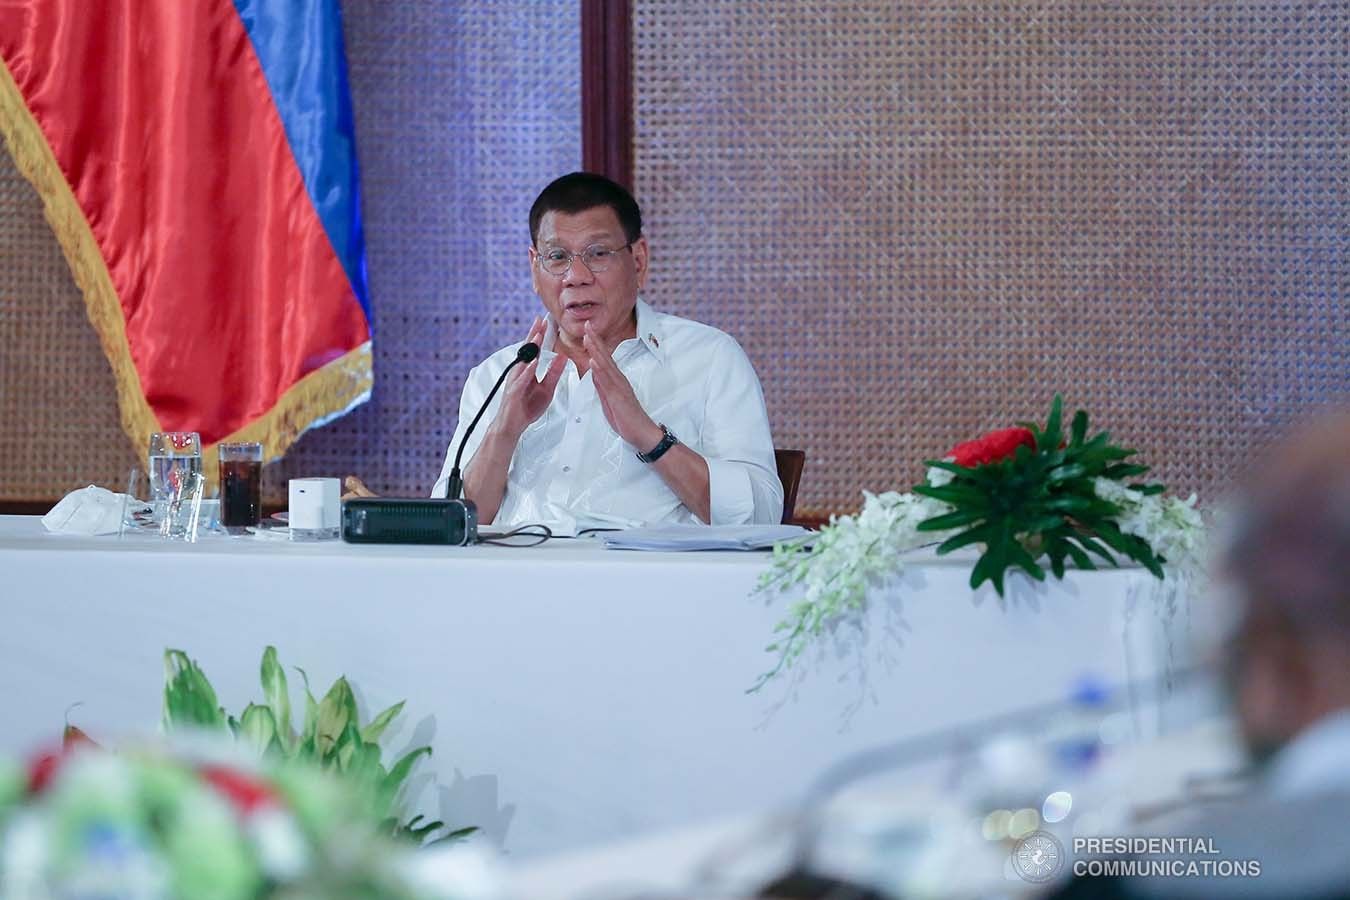 Duterte says to lift all COVID-19 restrictions once vaccines widely available